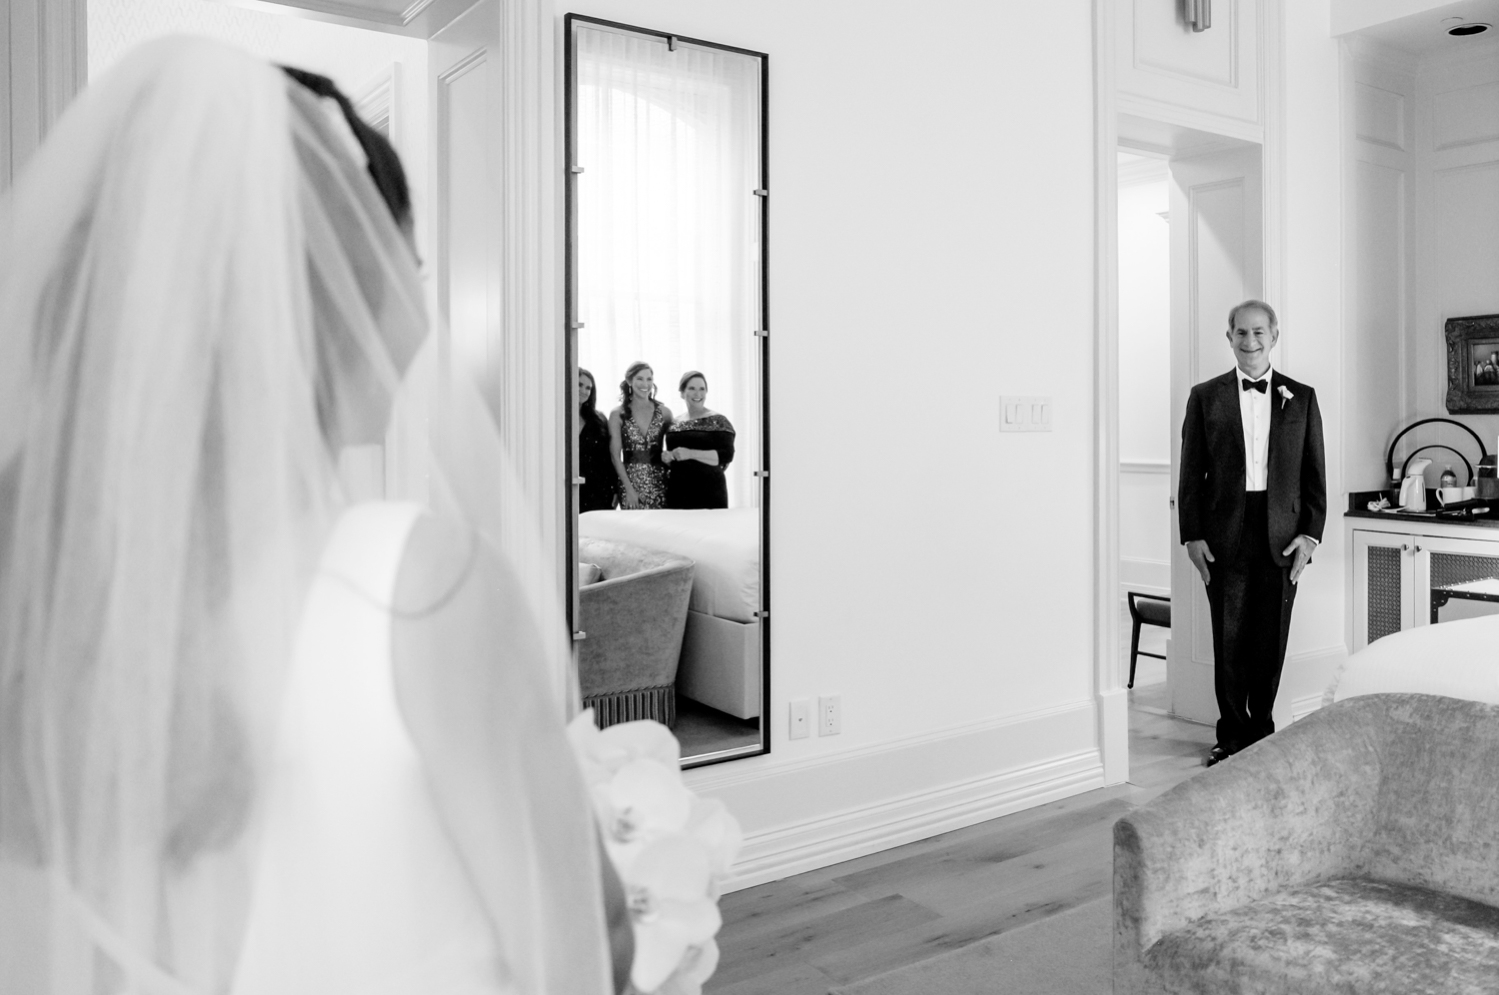 The father of the bride smiles as he sees his daughter in her wedding dress for the first time.